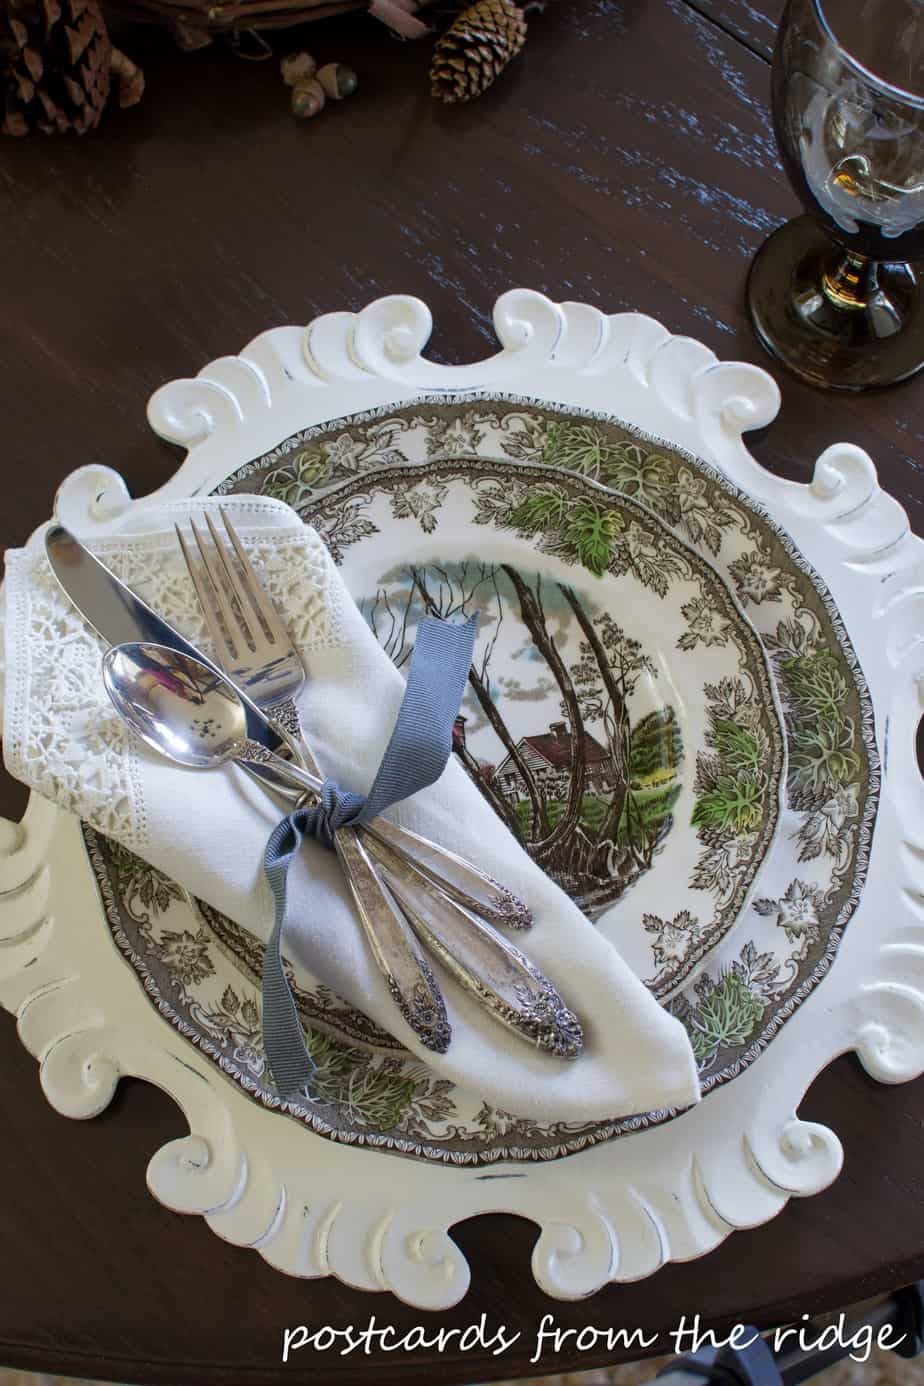 Vintage silverware and linens paired with brown transferware.